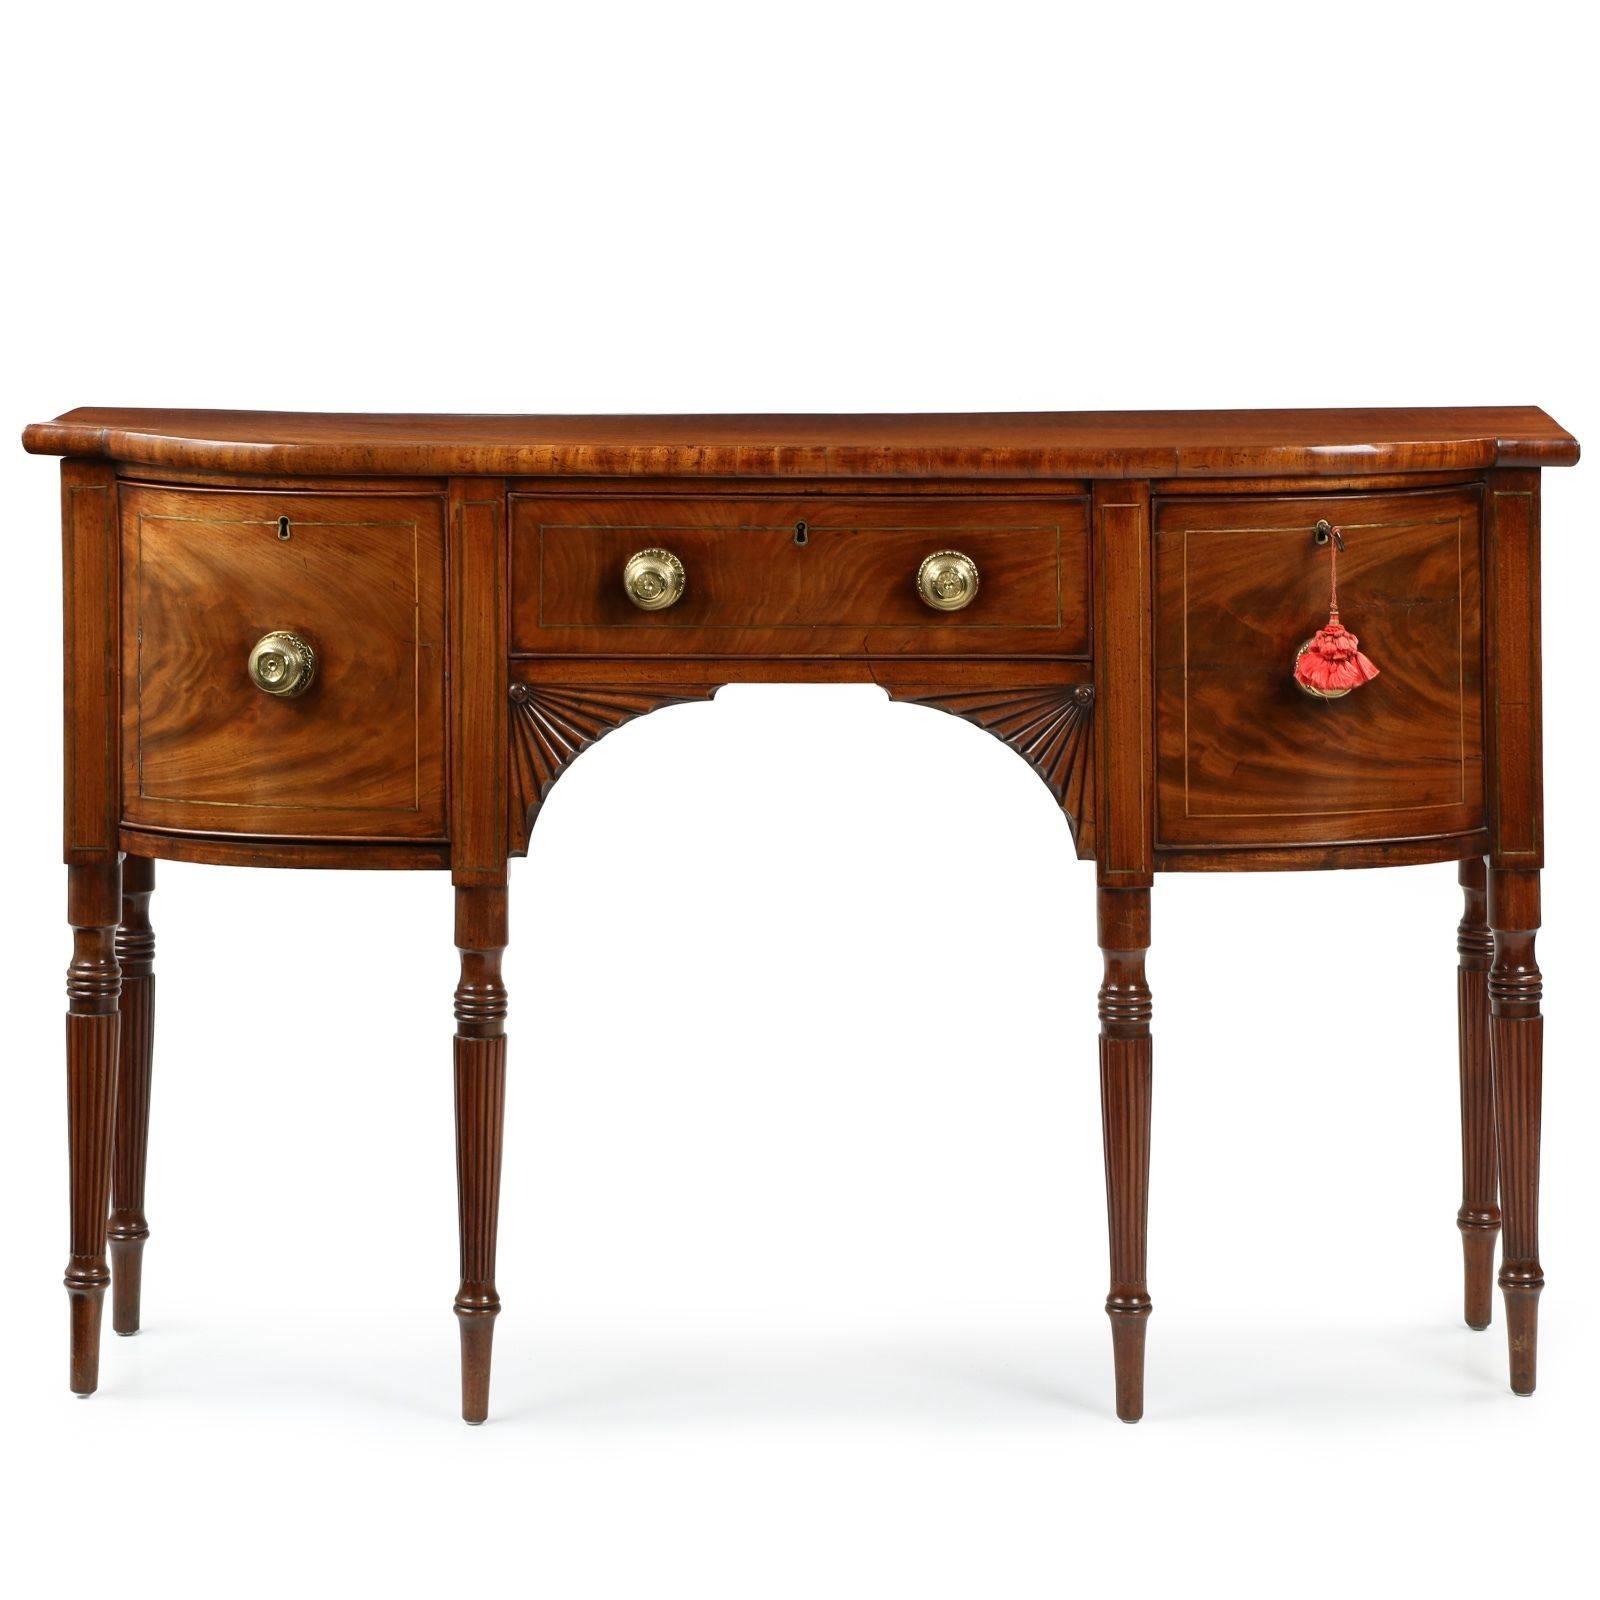 A piece that is inordinately beautiful in every way, refined and balanced with a wonderfully mellowed patination throughout, this very fine Regency sideboard is a rare and precious find.  Of petite and very desirable dimensions, being only 15 7/8